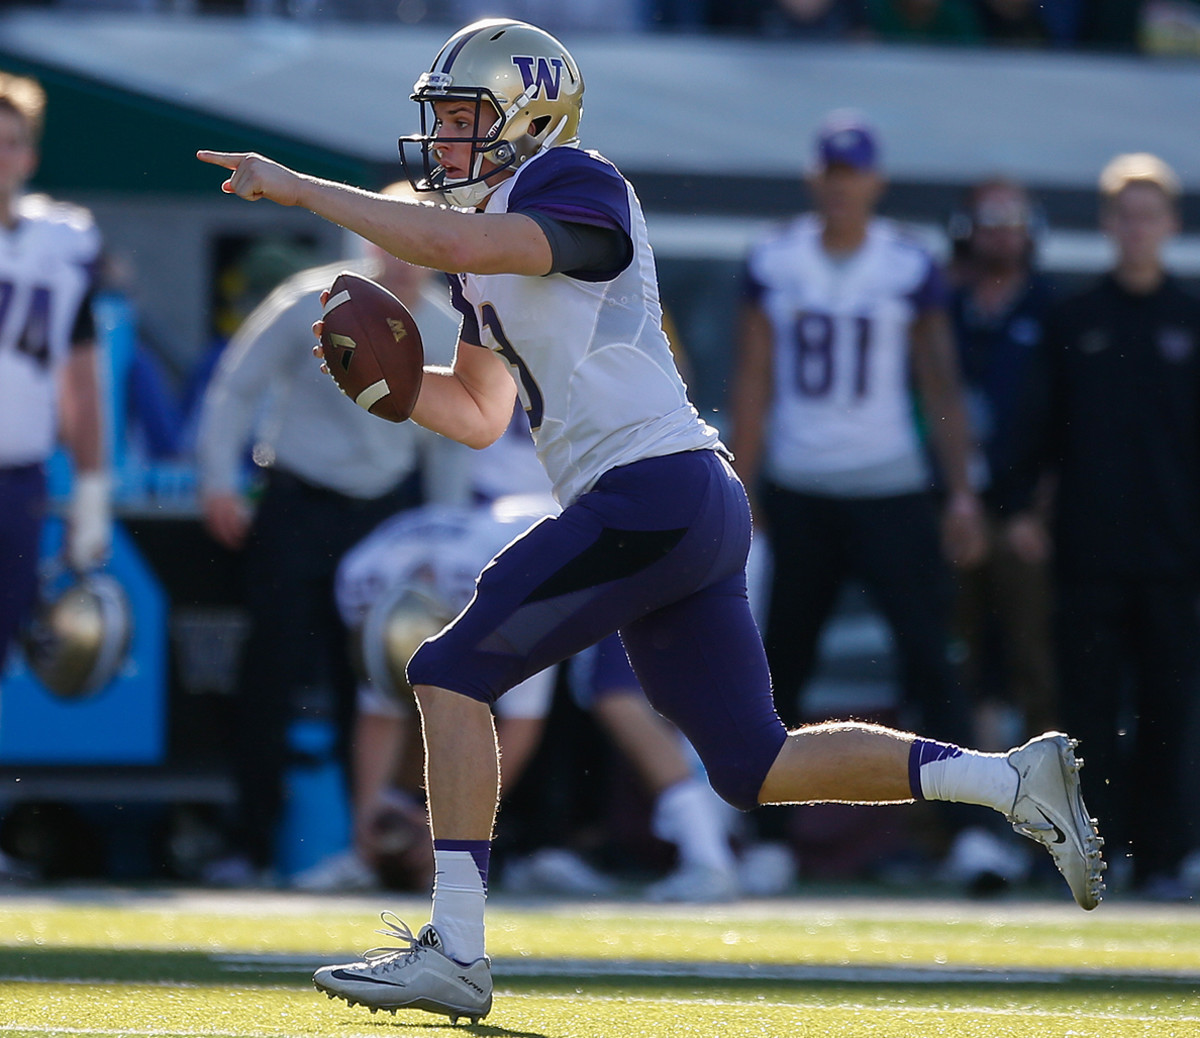 Washington QB Jake Browning Did 500 Pushups in Practice. Here's How to